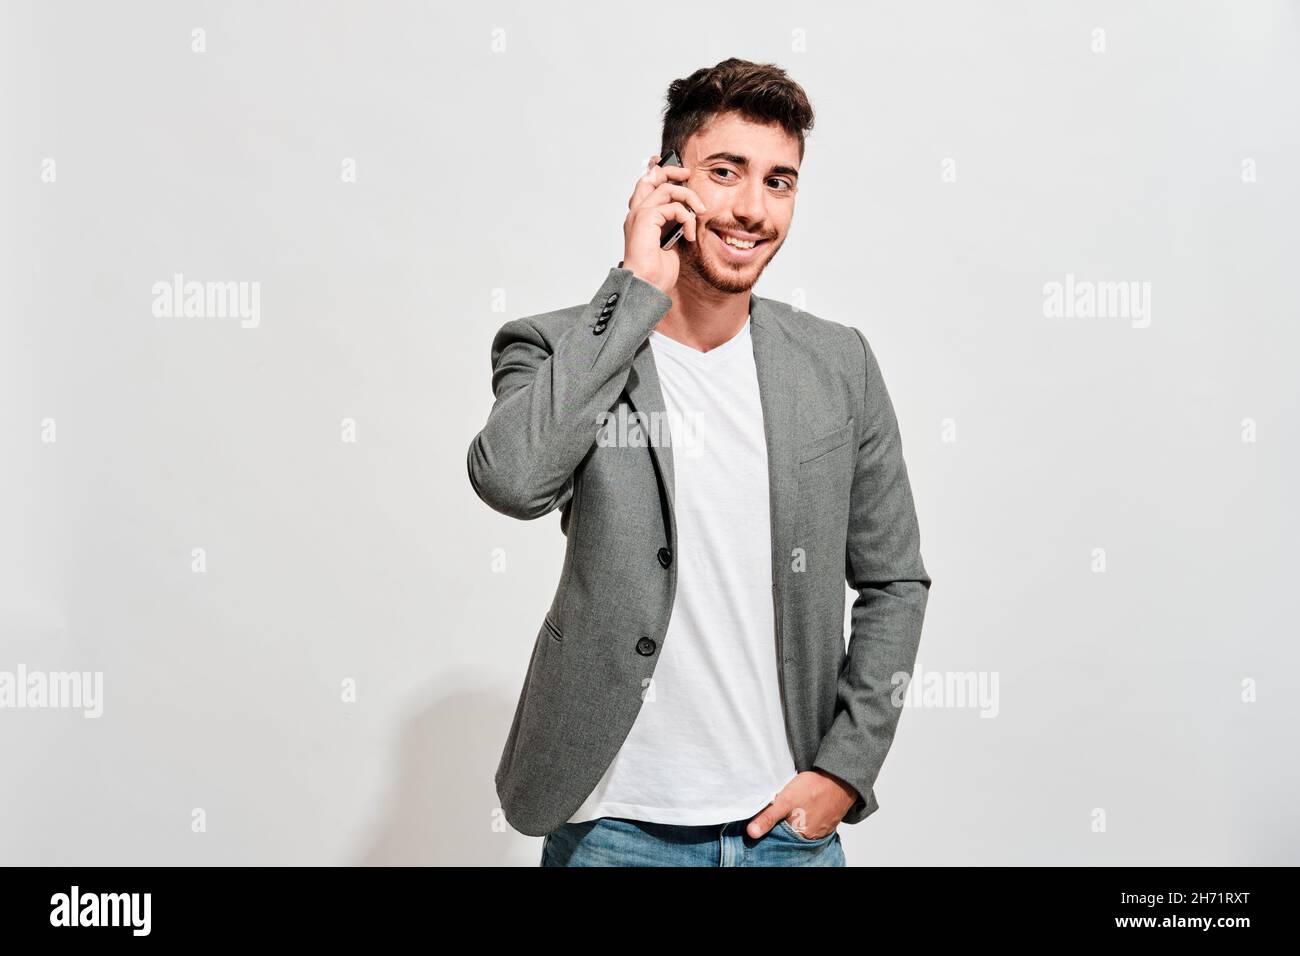 Happy young man wearing jeans, a white tshirt and a grey blazer talking with someone on his mobile phone Stock Photo